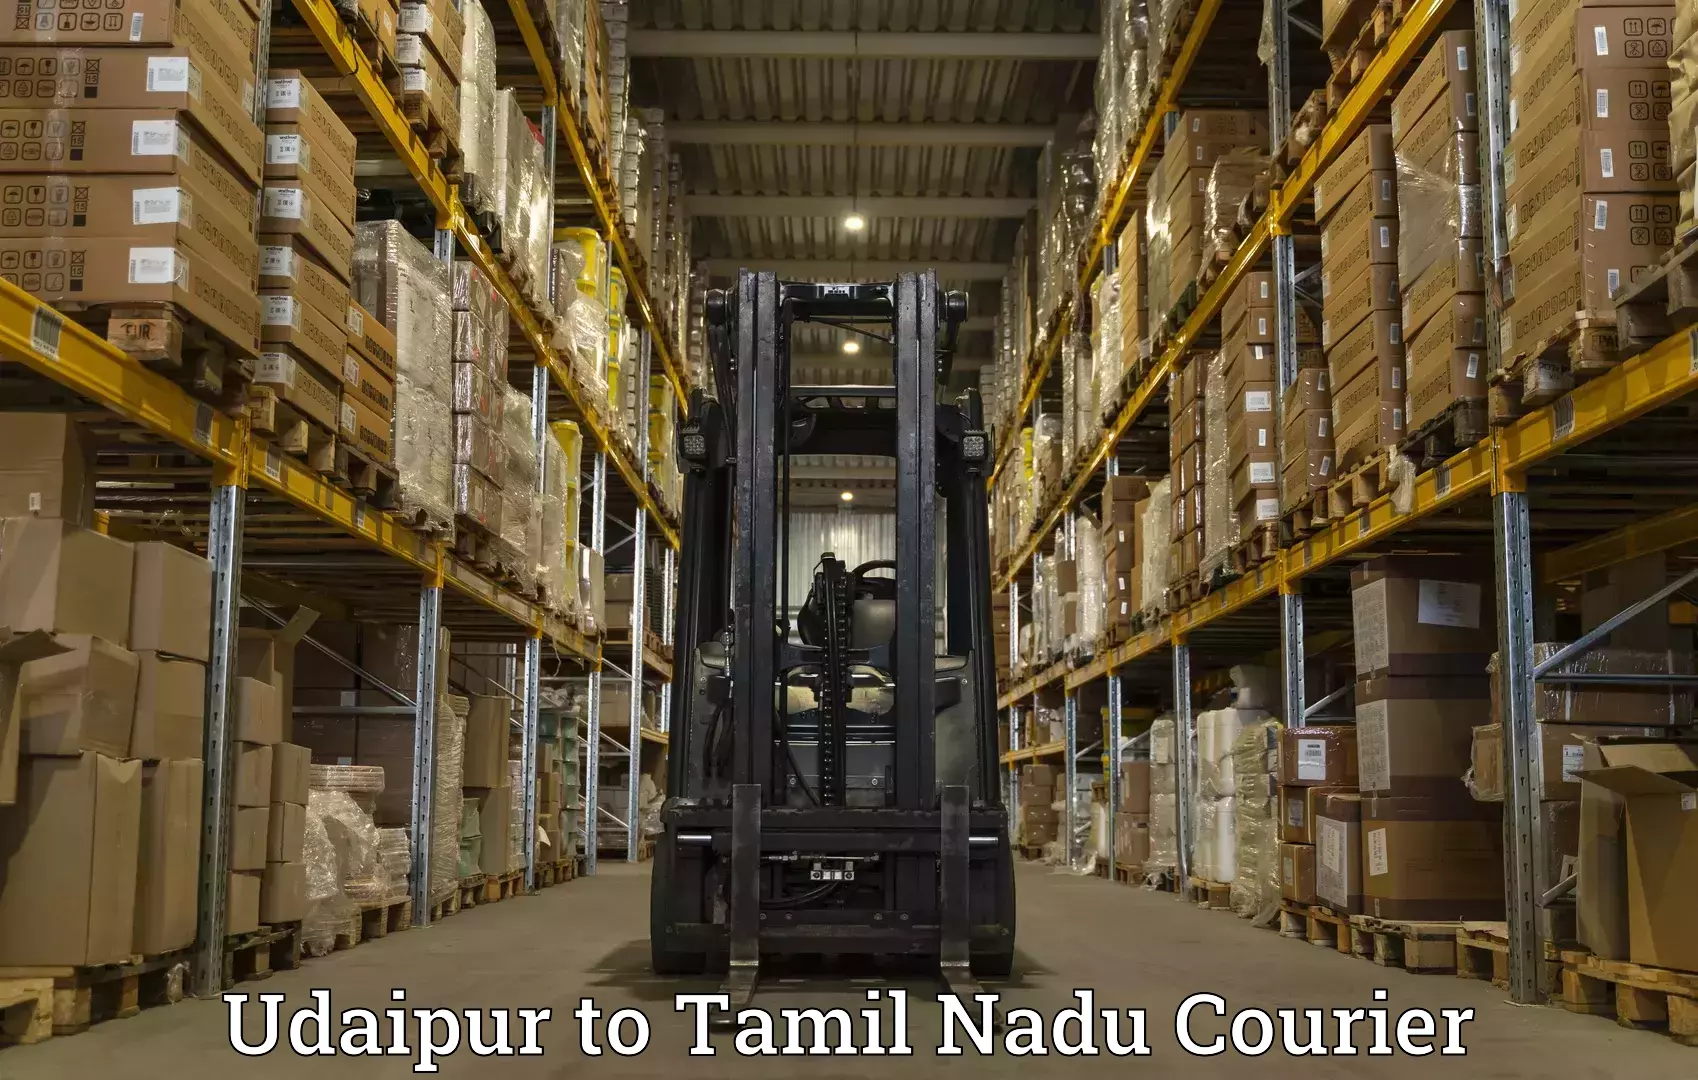 Efficient shipping operations Udaipur to Vellore Institute of Technology